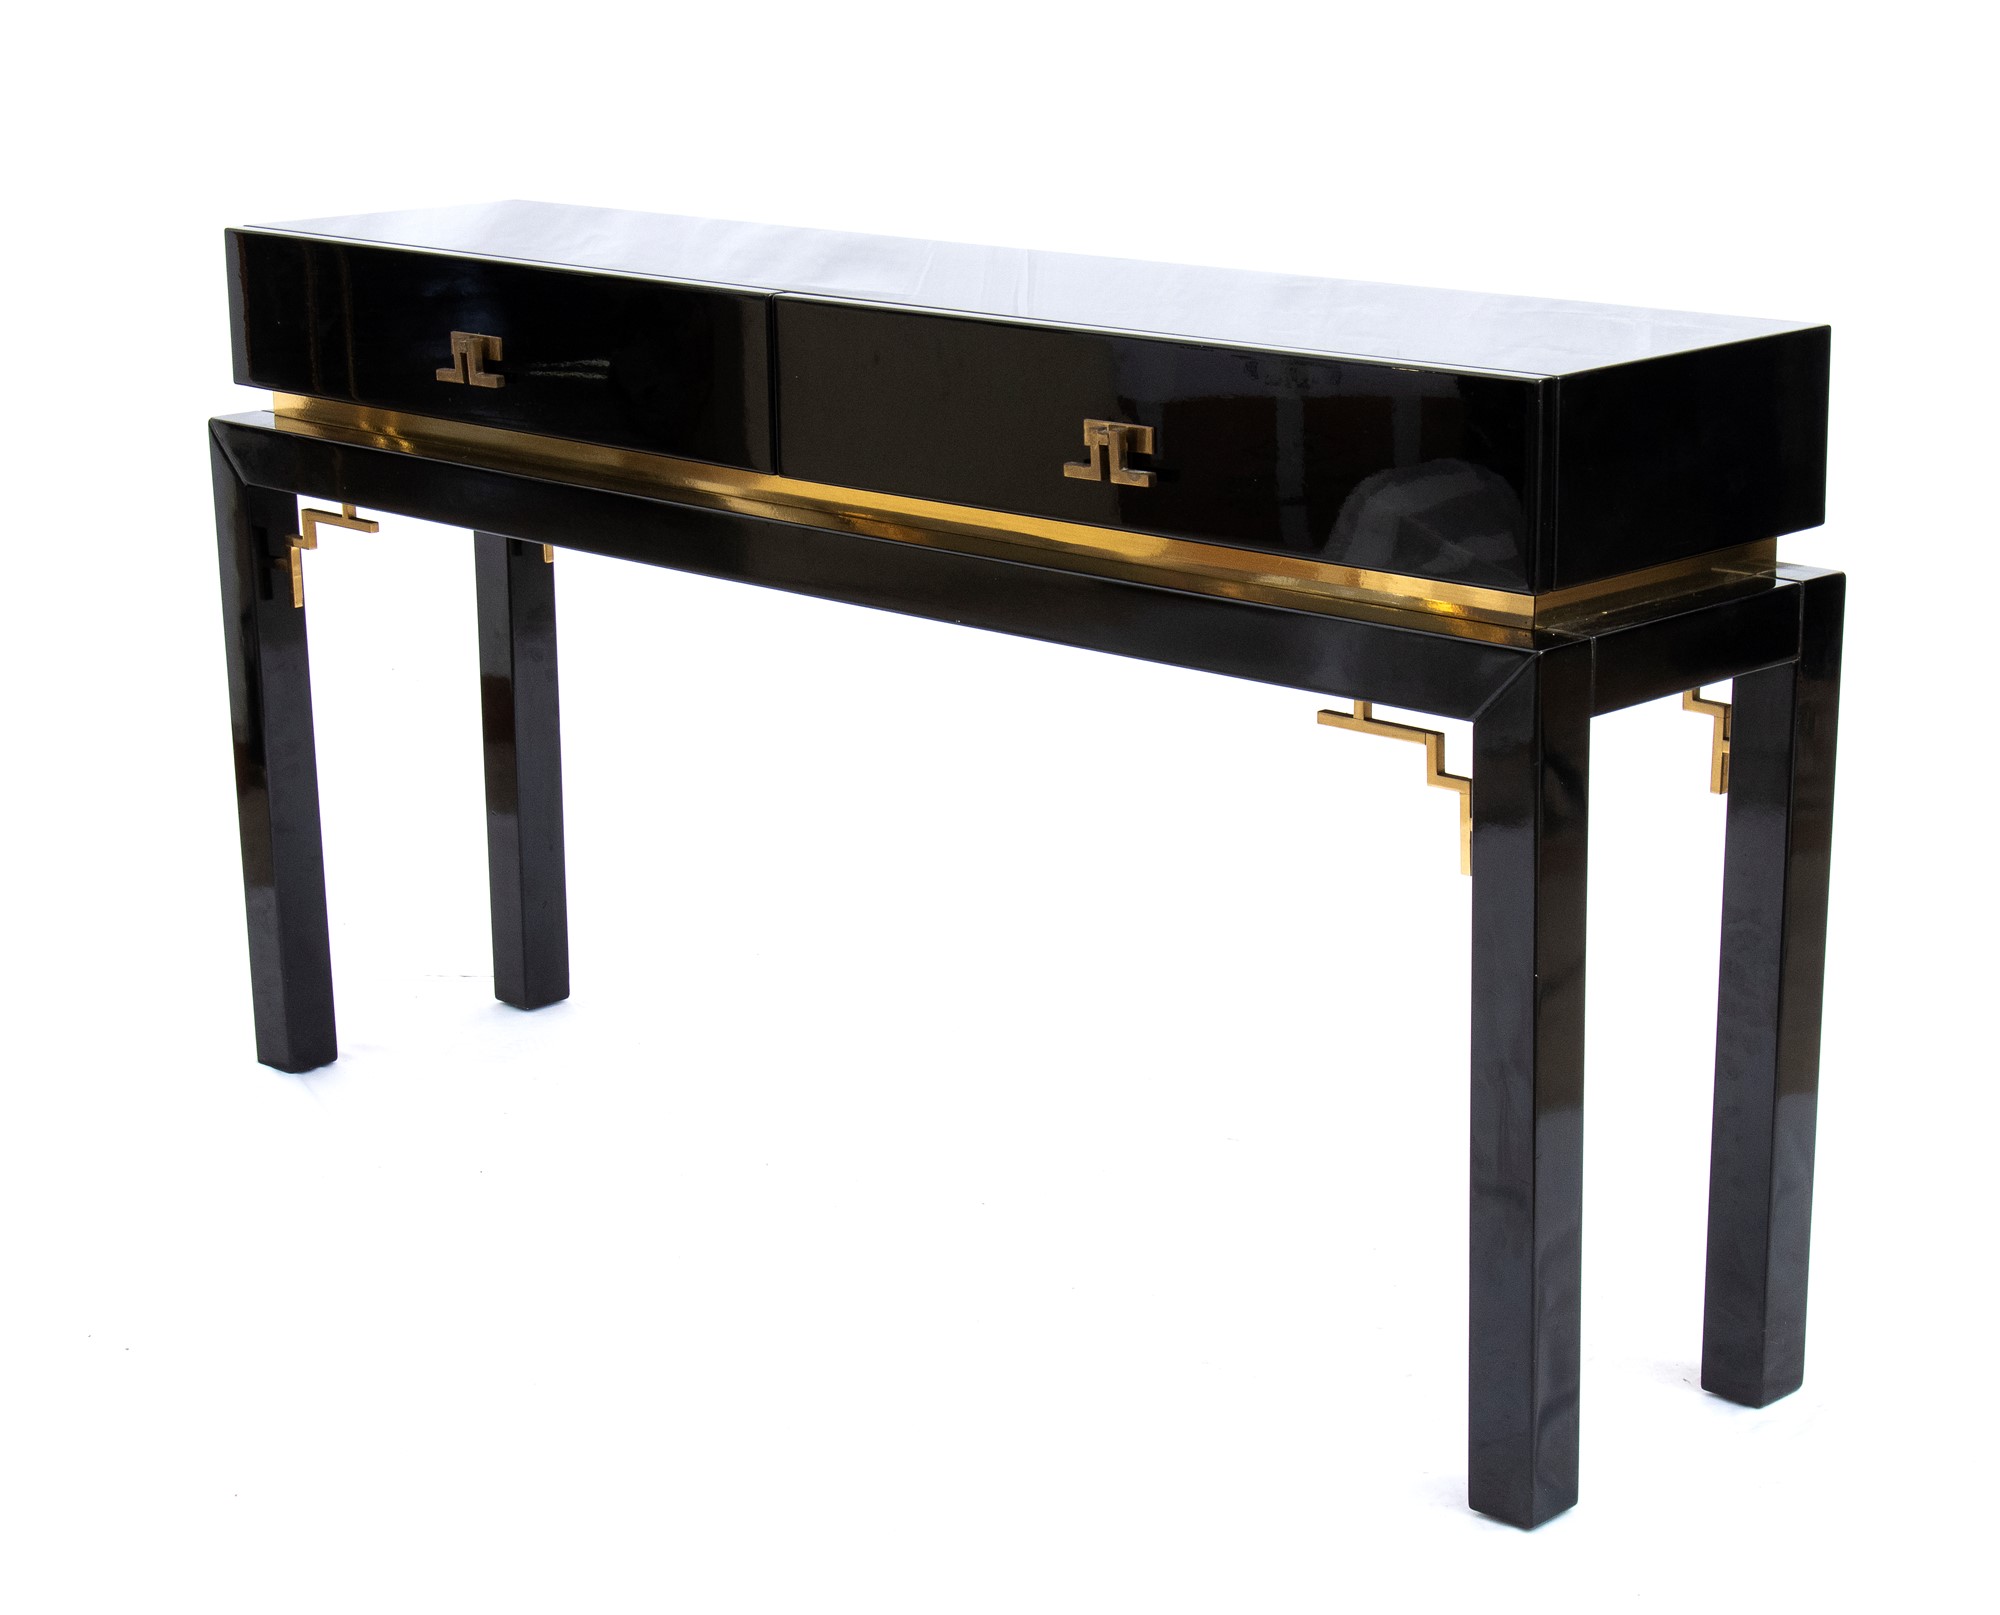 Console in lacquered wood and brass with two drawers at the front - Image 12 of 19